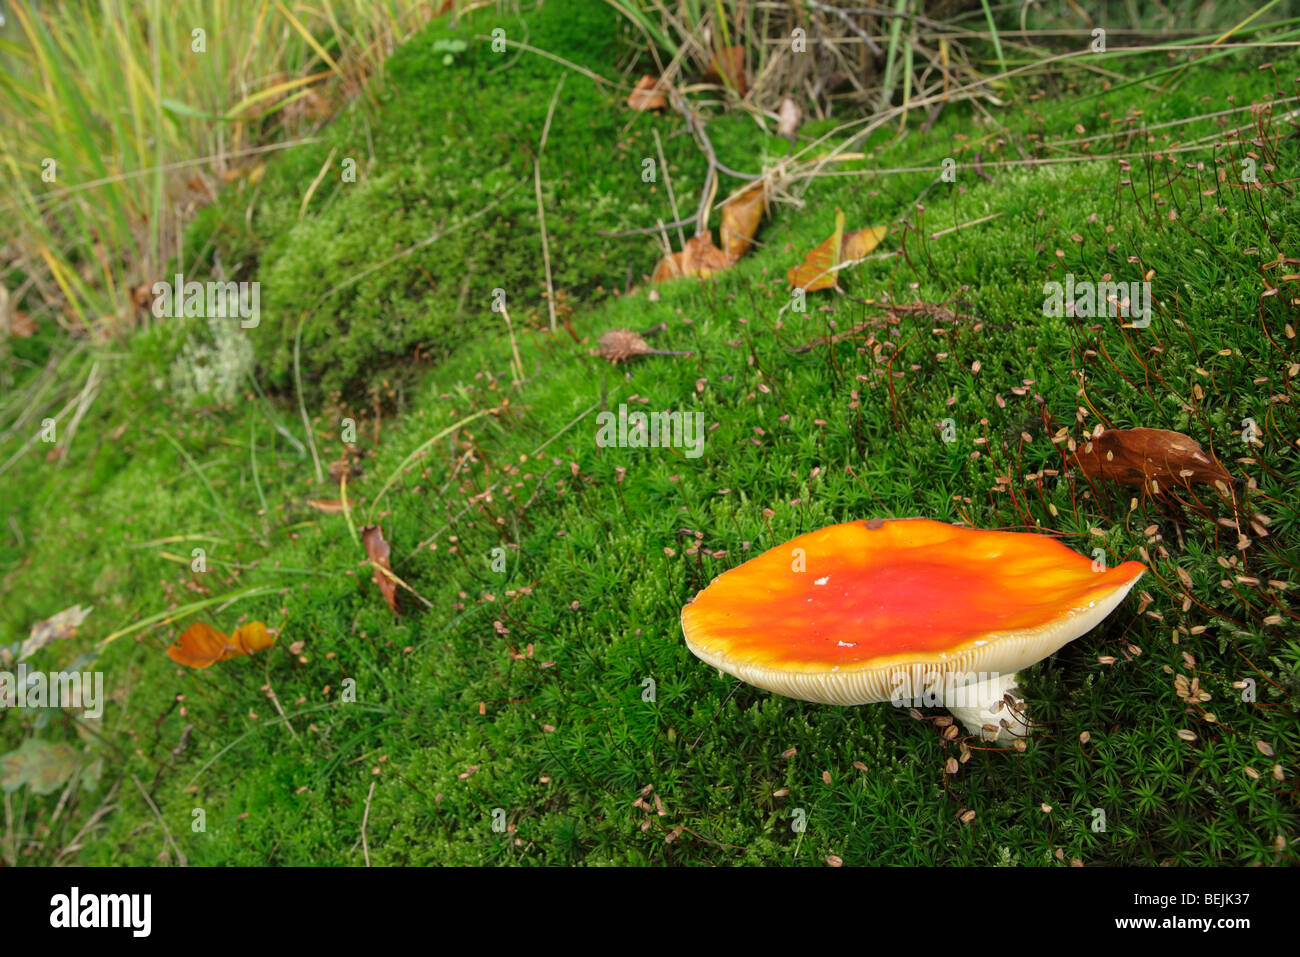 Fly agaric toadstool (Amanita muscaria) among moss in autumn forest Stock Photo